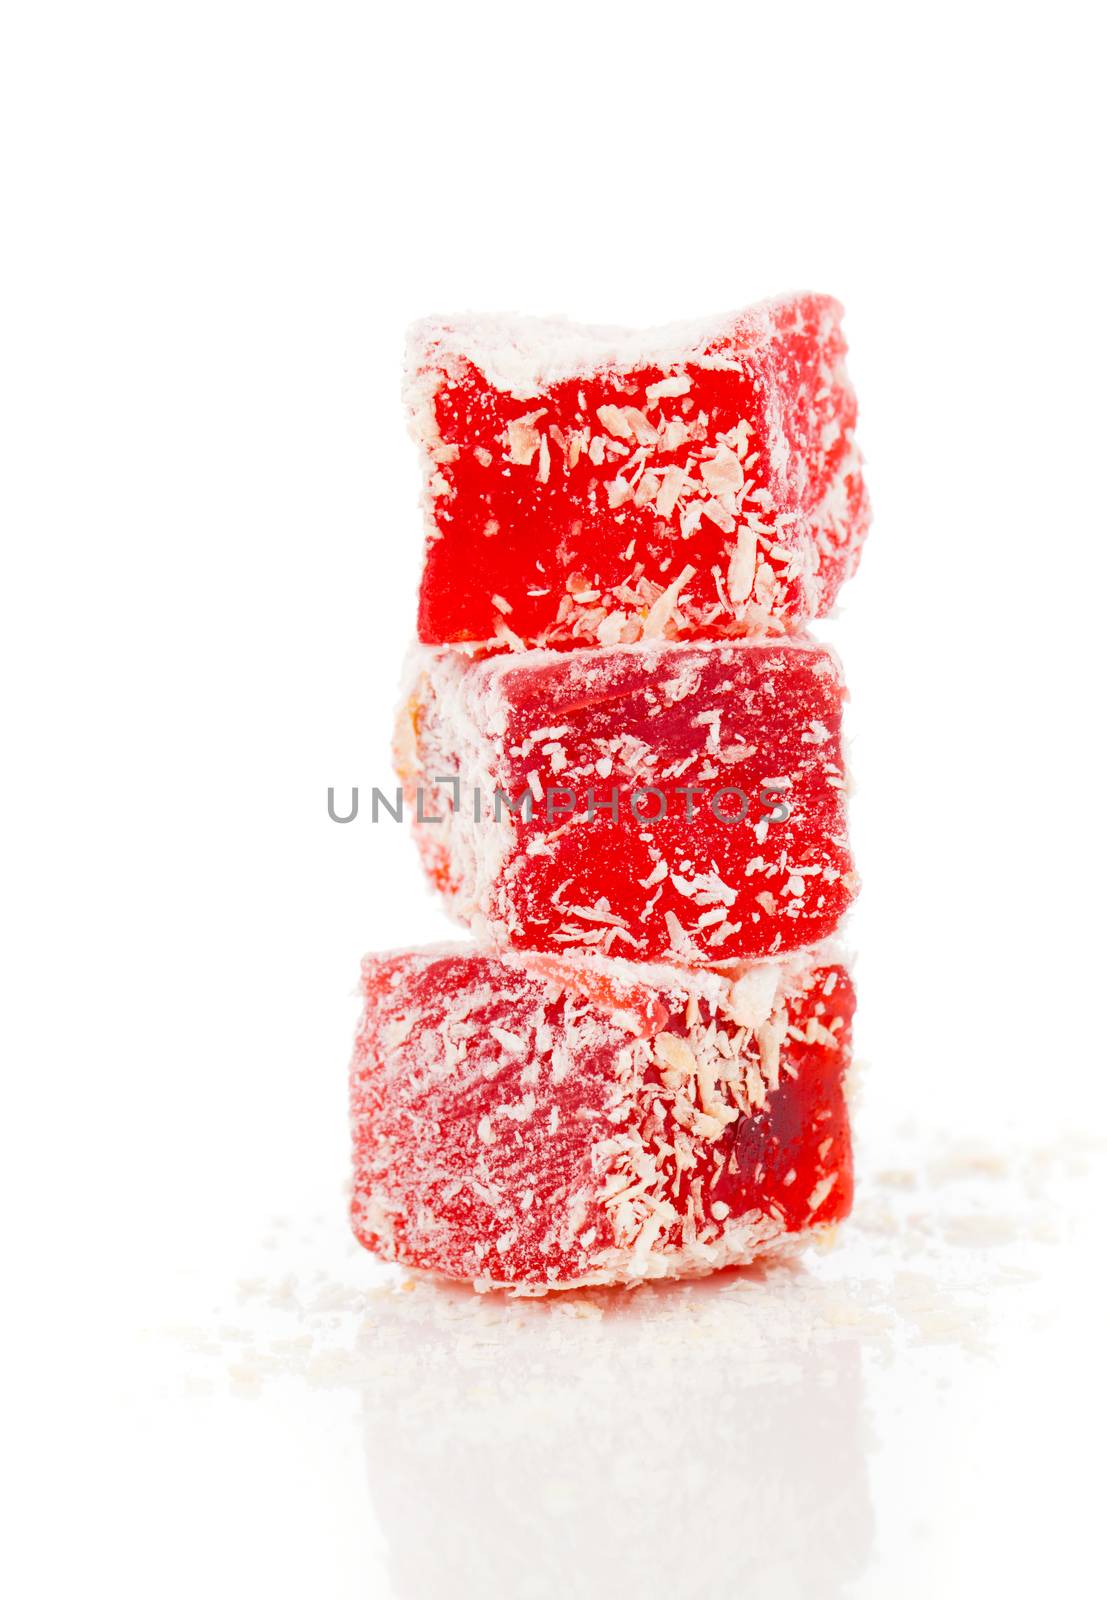 Sweet pieces of turkish delight on white background by motorolka